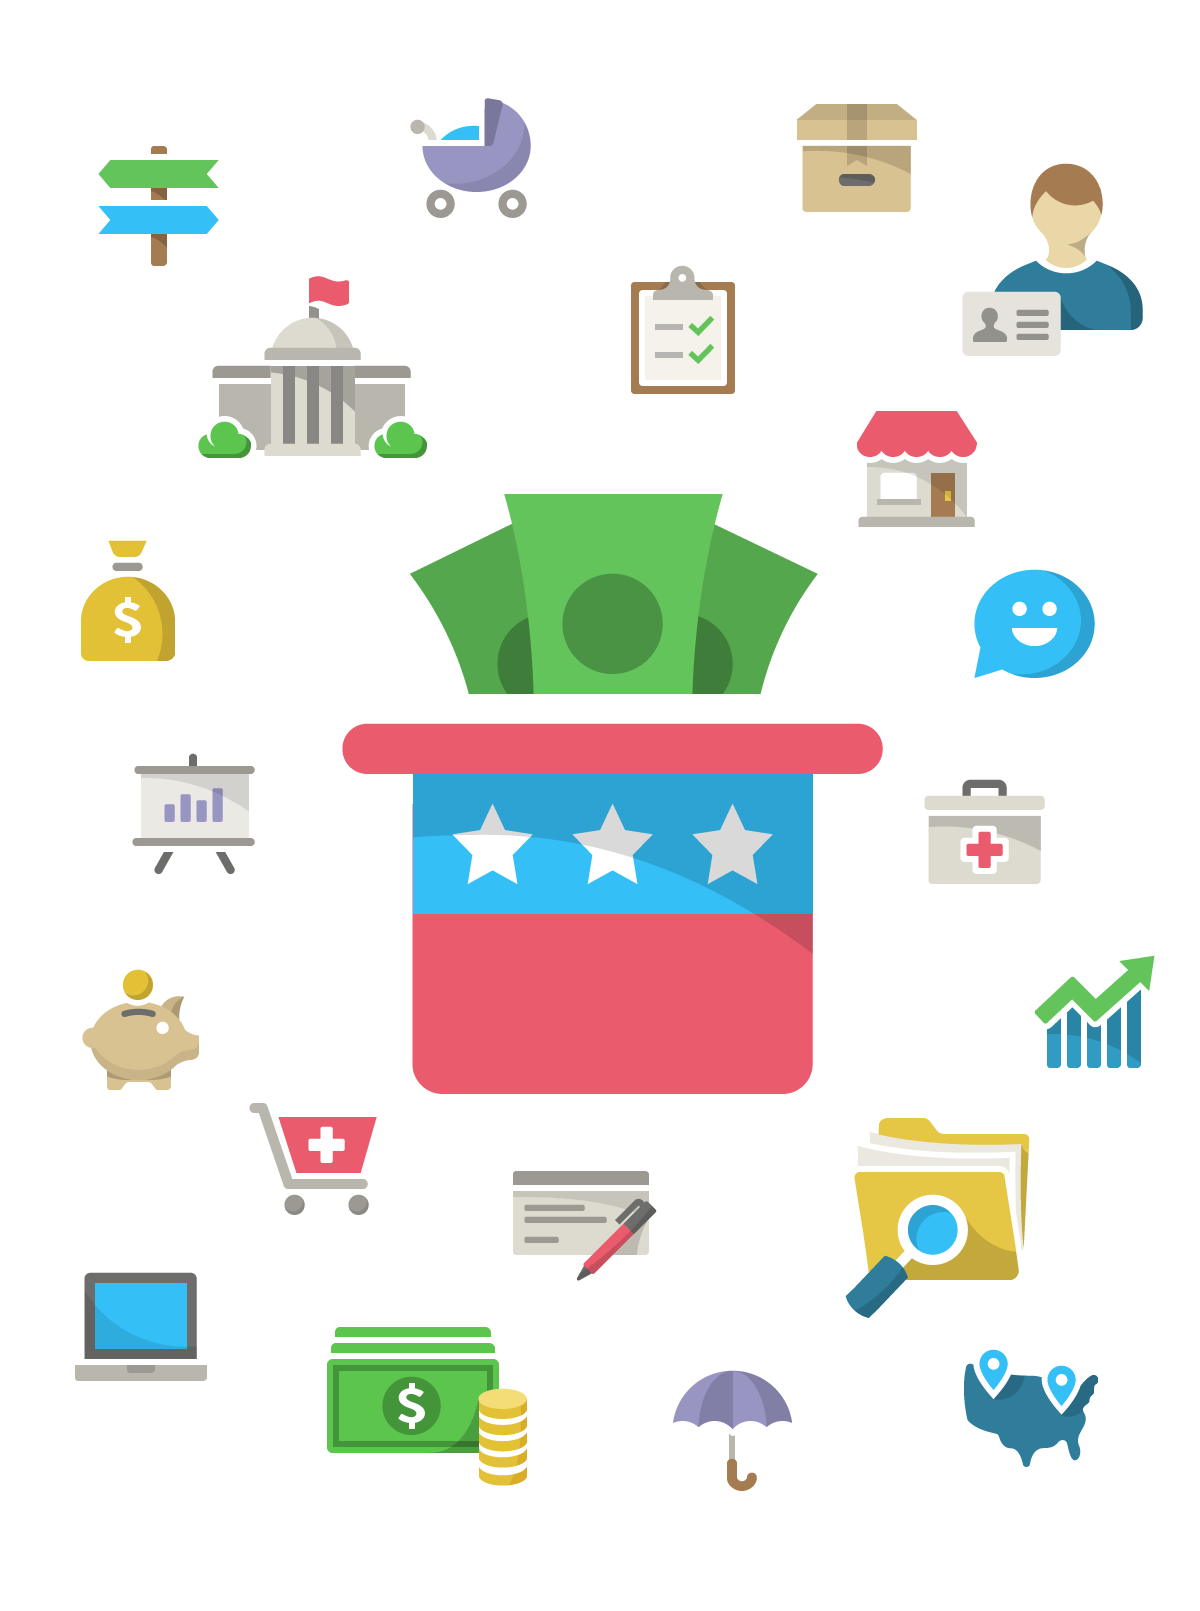 turbotax icons iconography icon set brand Style flat shadow modern Guide guidelines set consistent professional